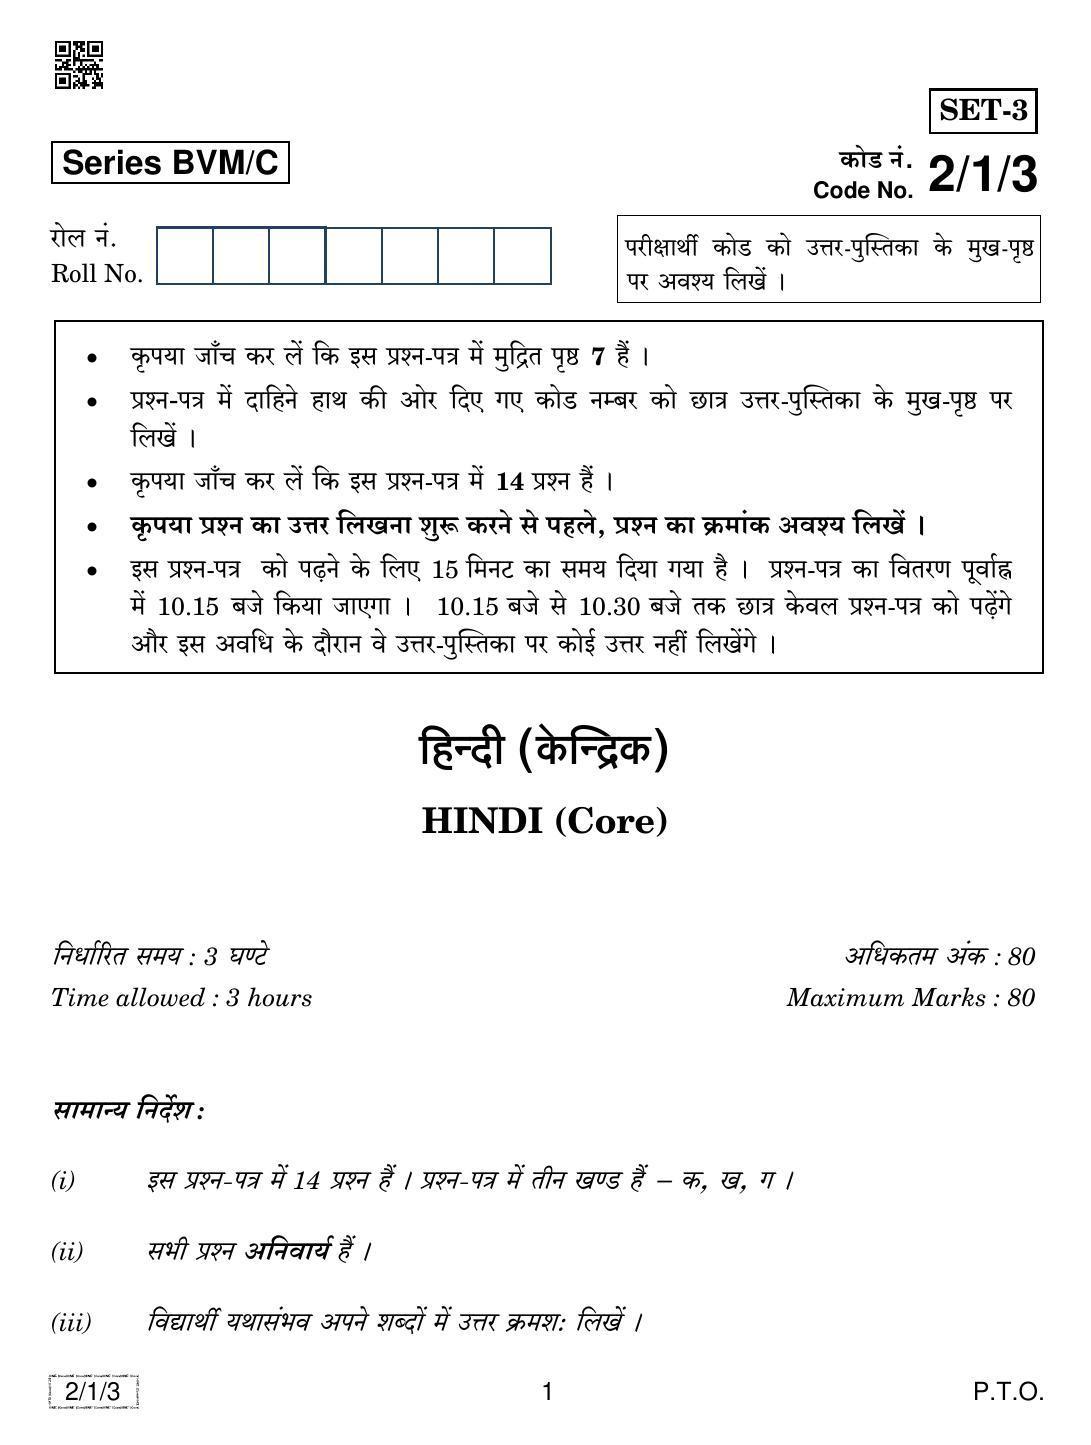 CBSE Class 12 2-1-3 HINDI CORE 2019 Compartment Question Paper - Page 1